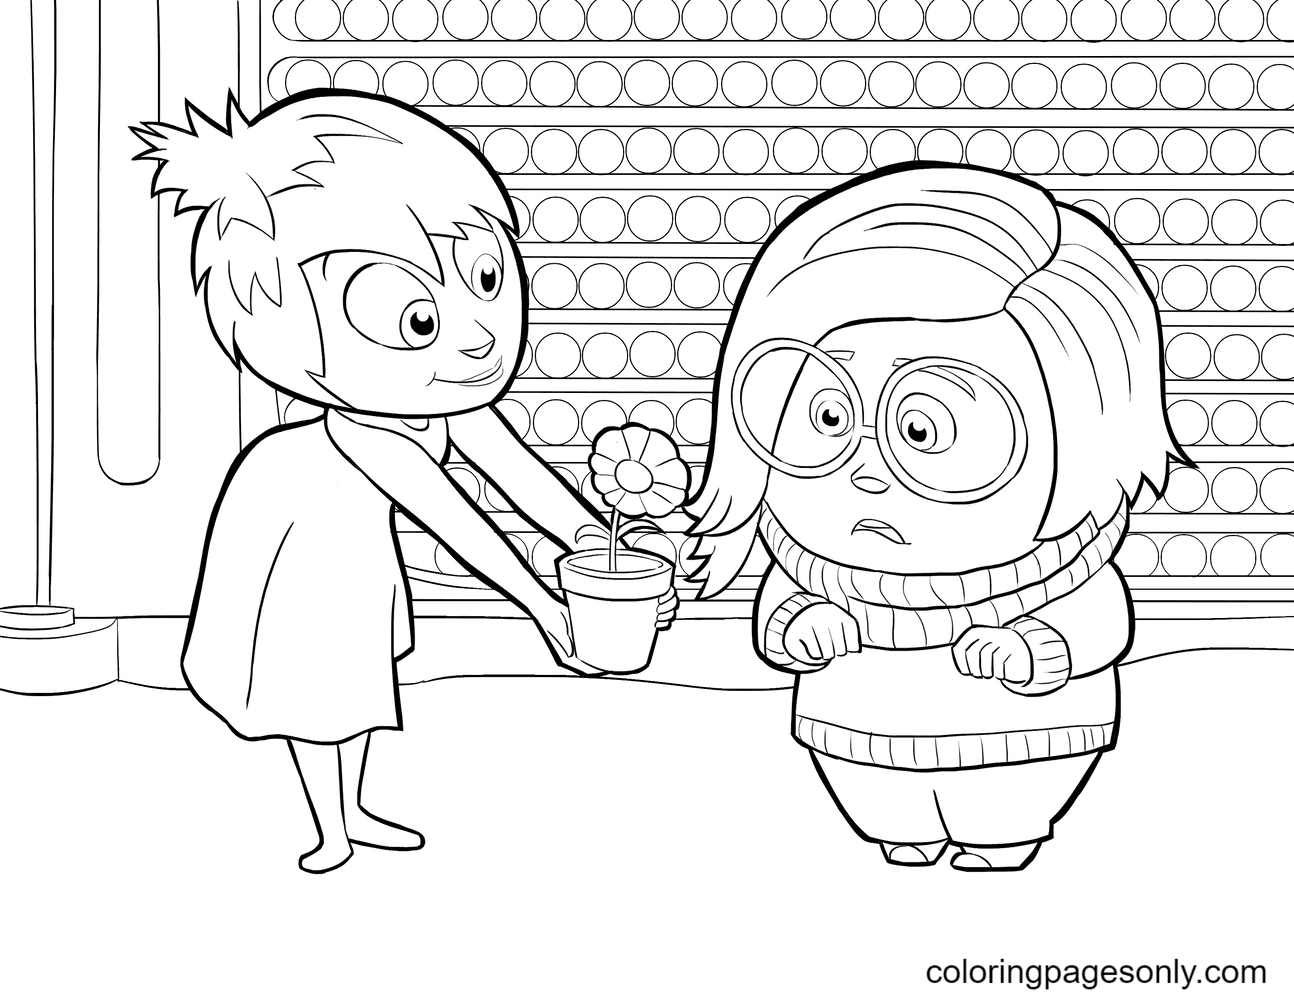 Joy gives flowers for Sadness Coloring Page